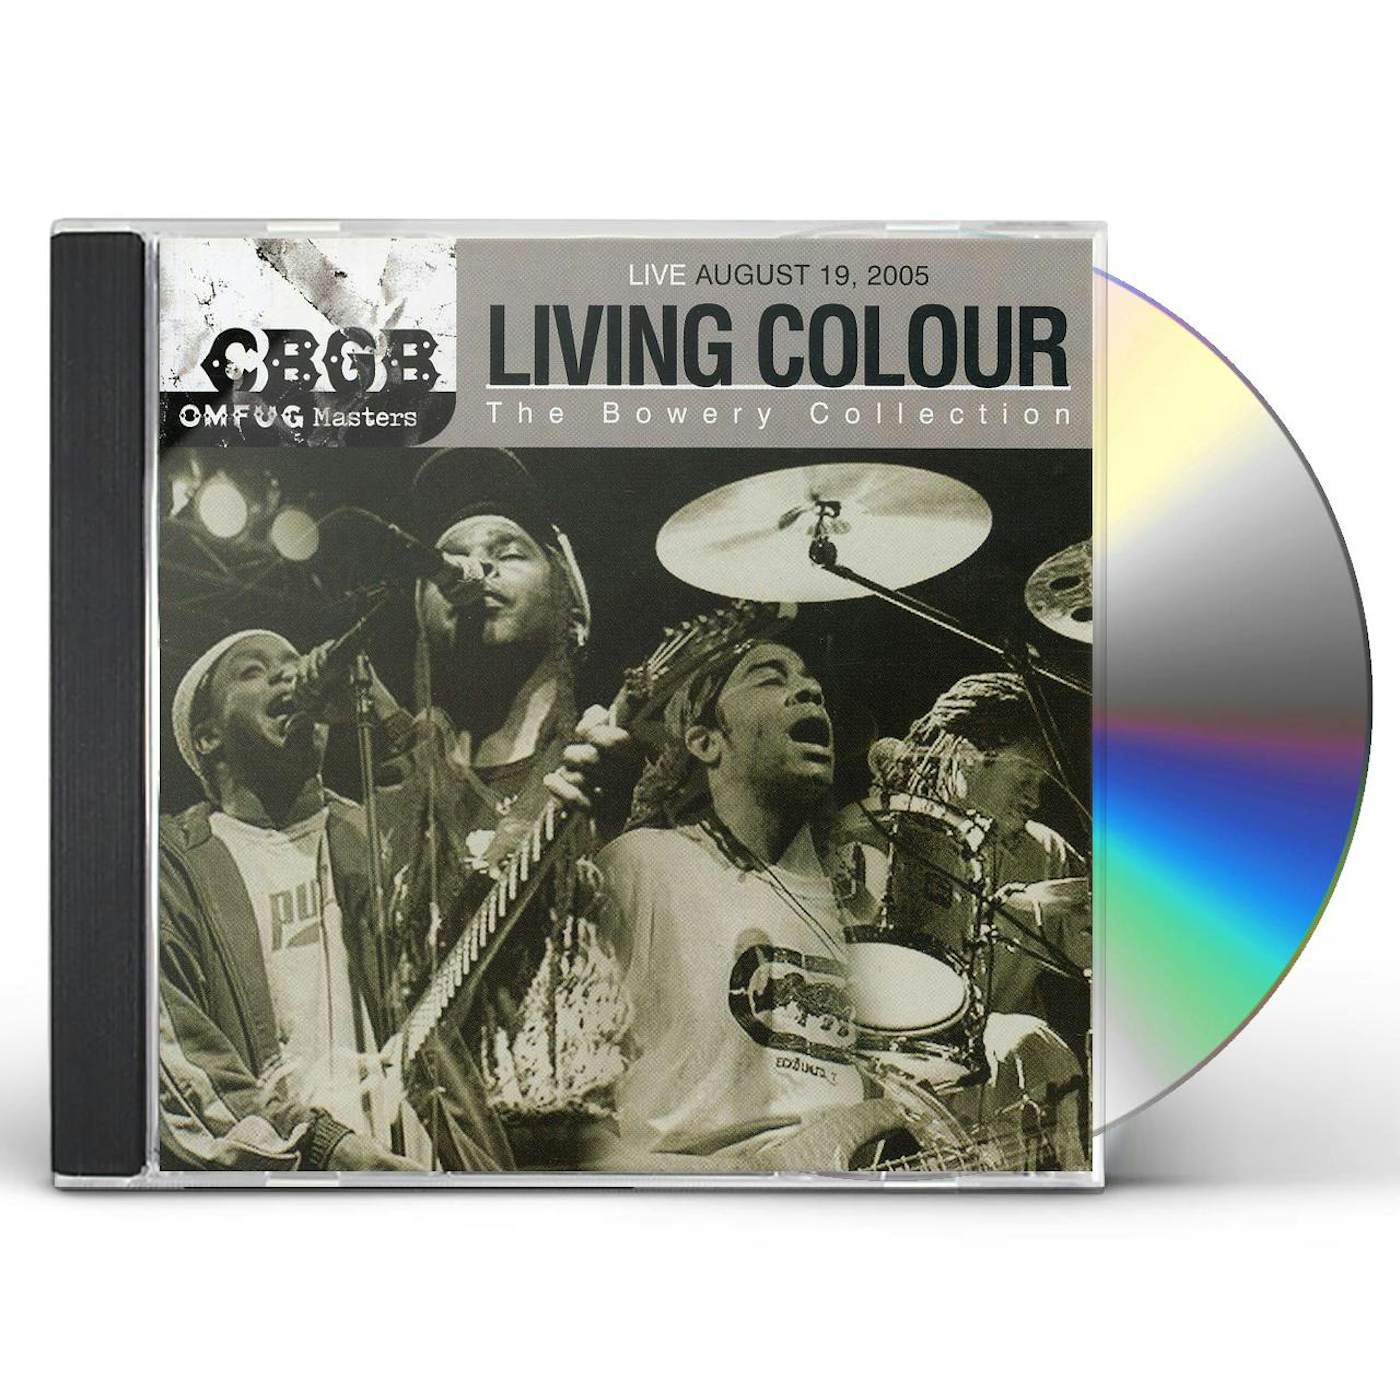 Living Colour CBGB OMFUG MASTERS: 8-19-05 BOWERY COLLECTION CD